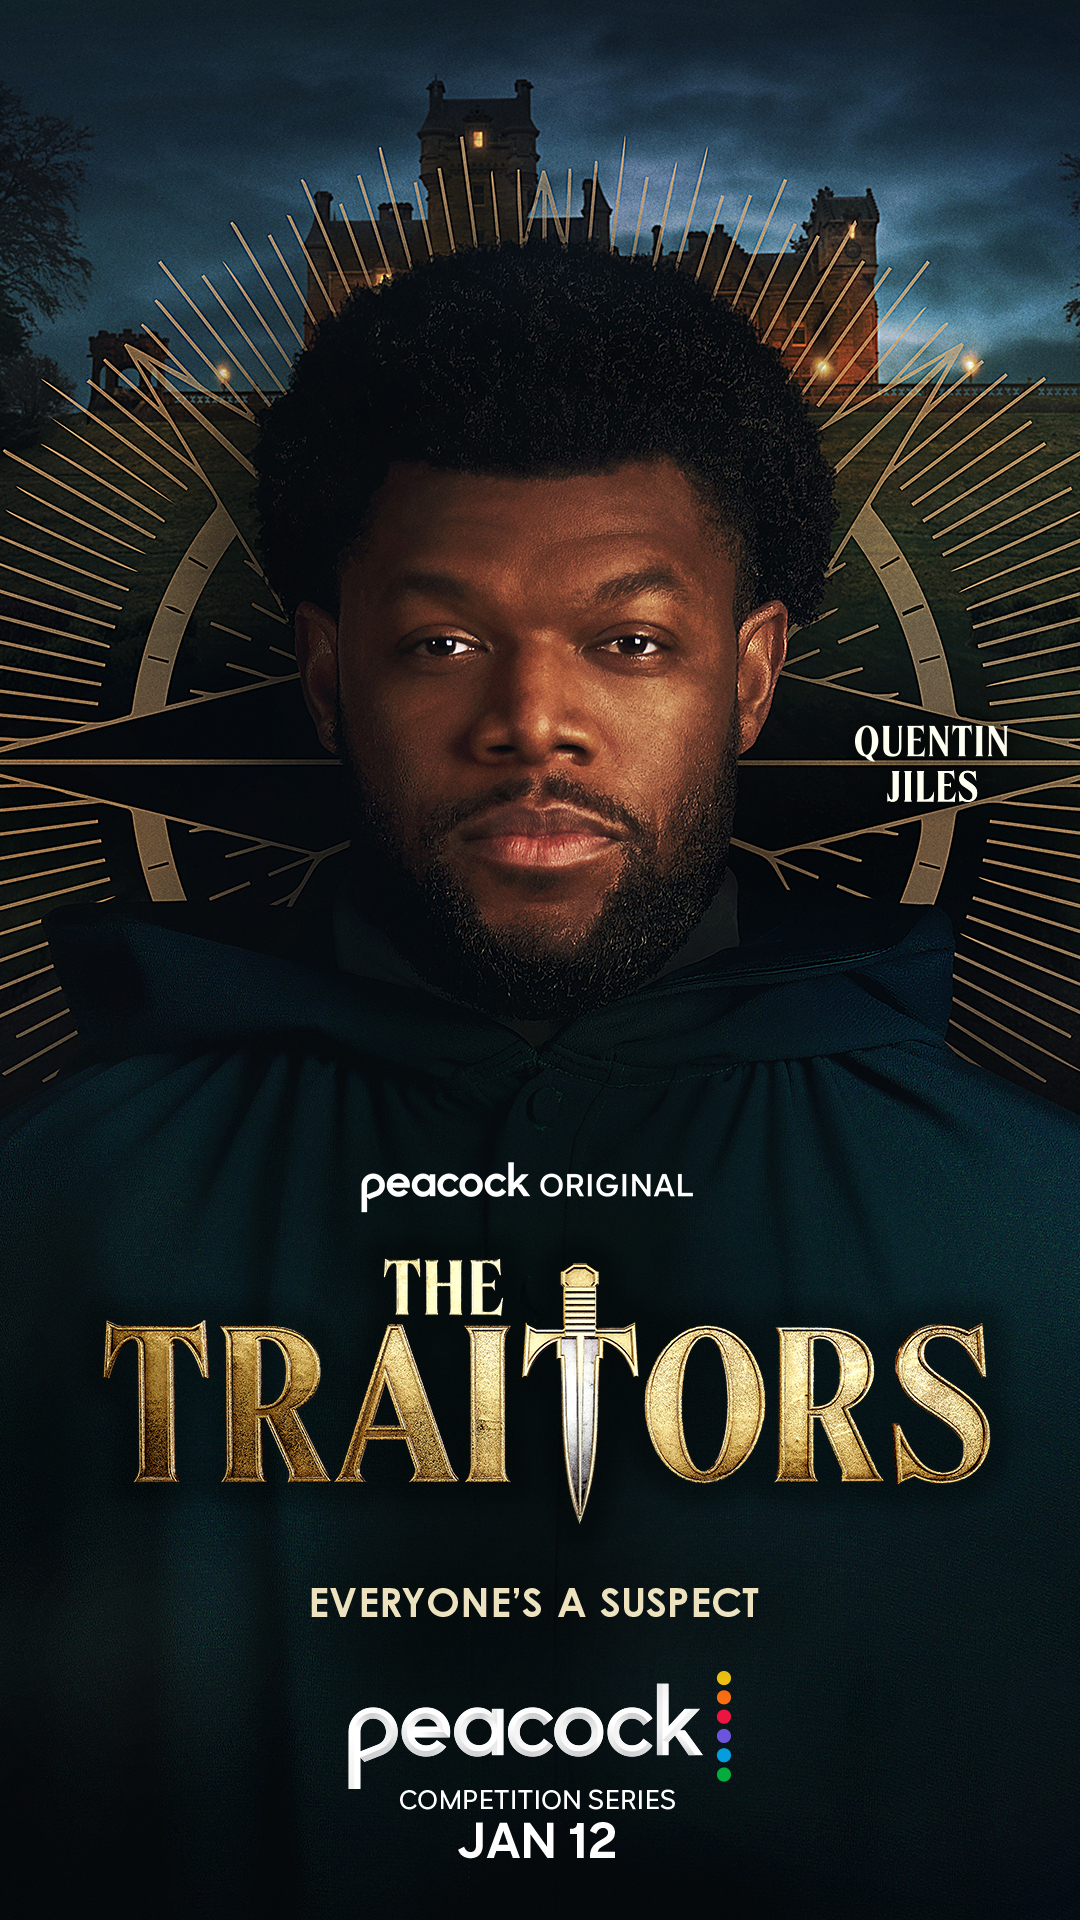 Quentin Jiles for 'The Traitors'